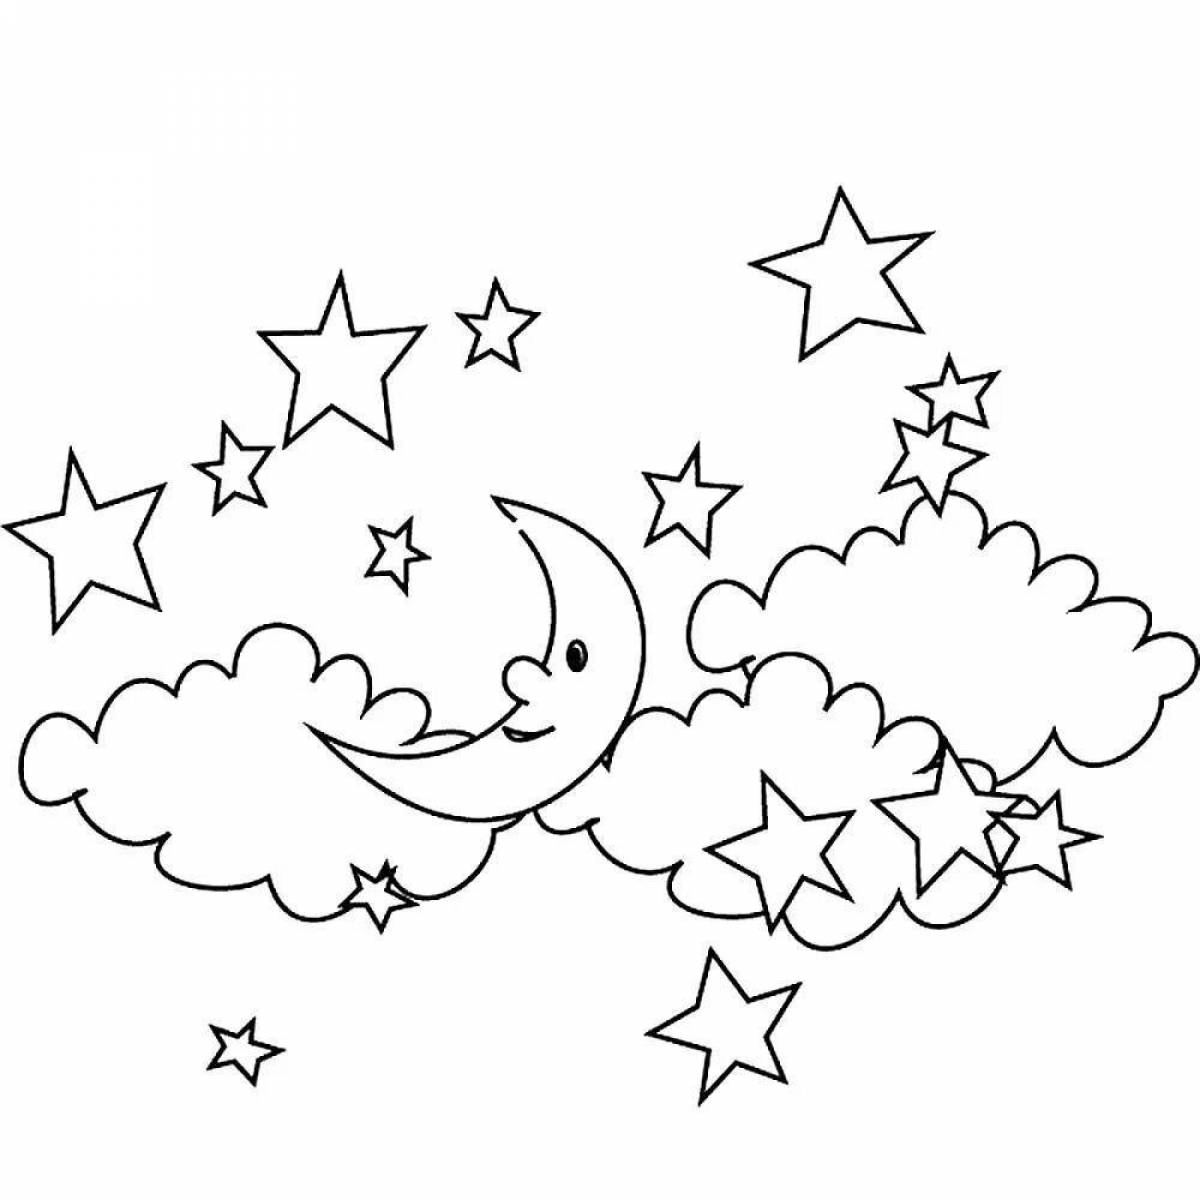 Exquisite sky coloring page